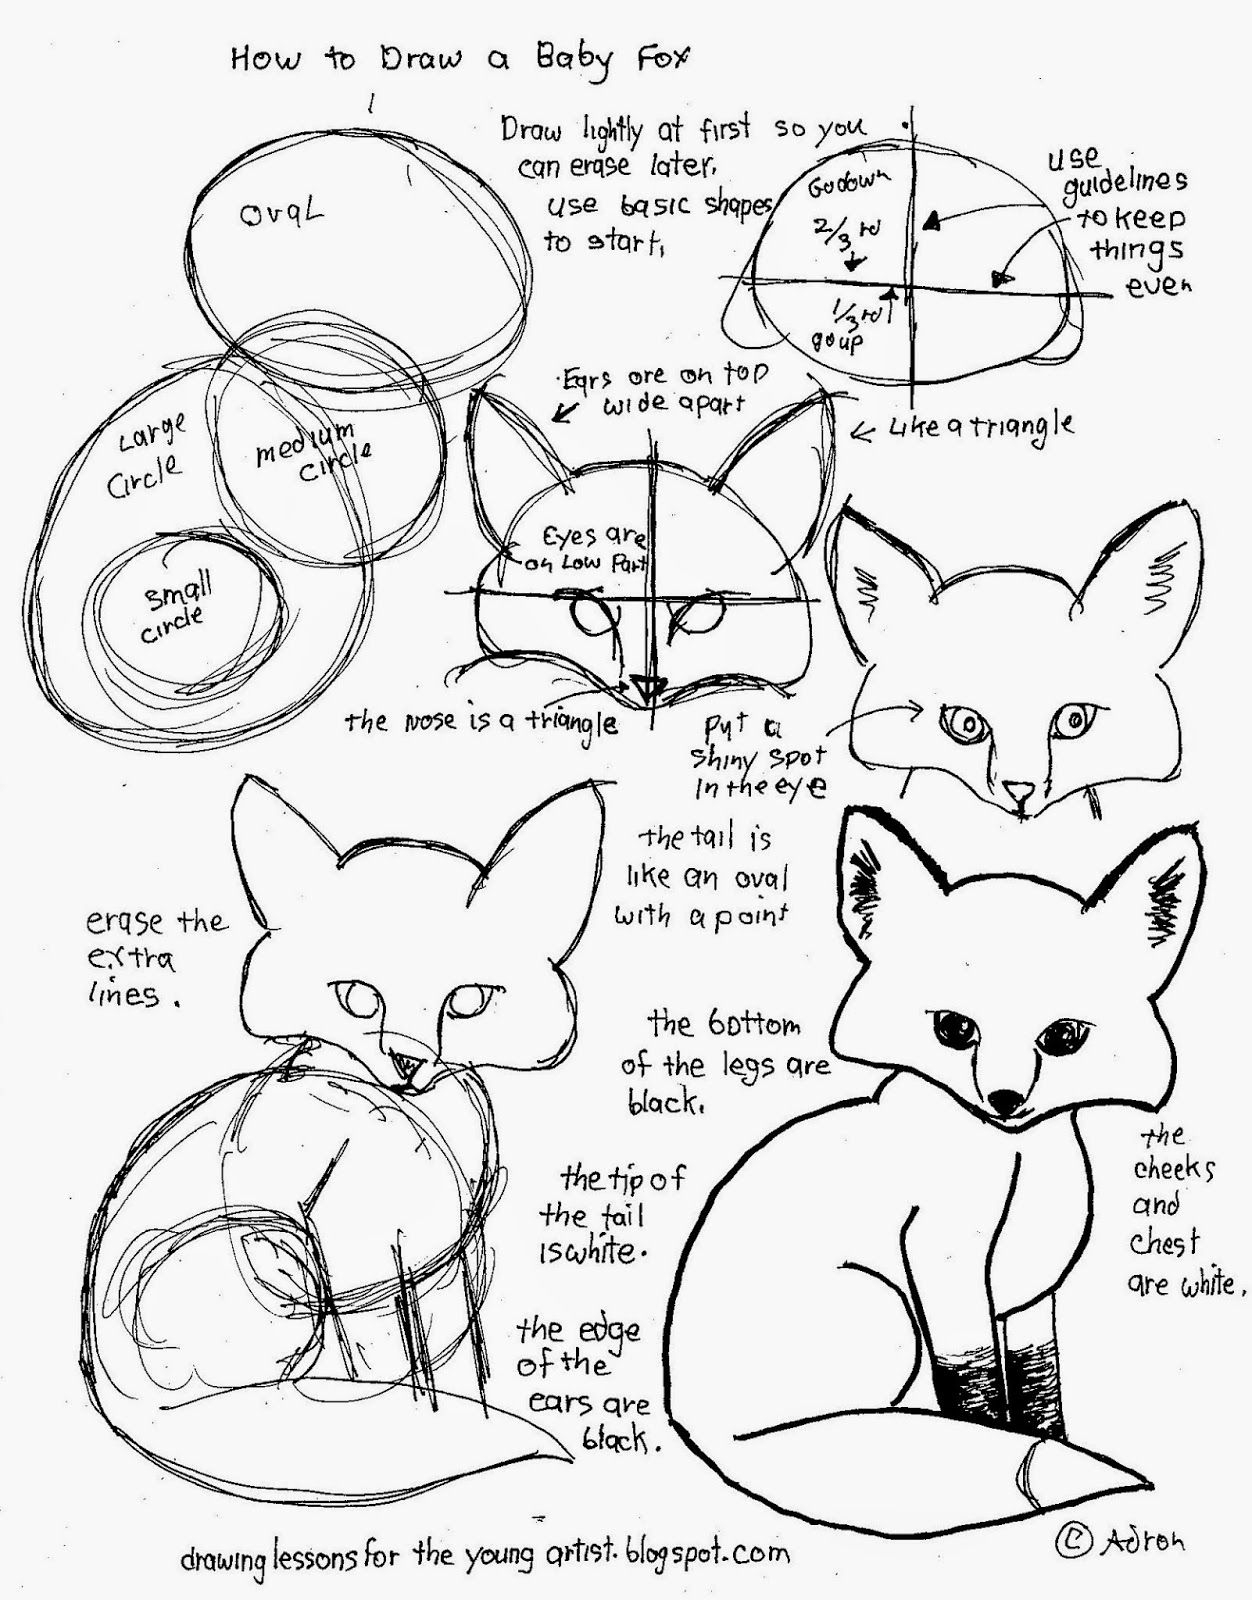 How To Draw Worksheets For The Young Artist: How To Draw A Baby Fox - Free Printable Drawing Worksheets